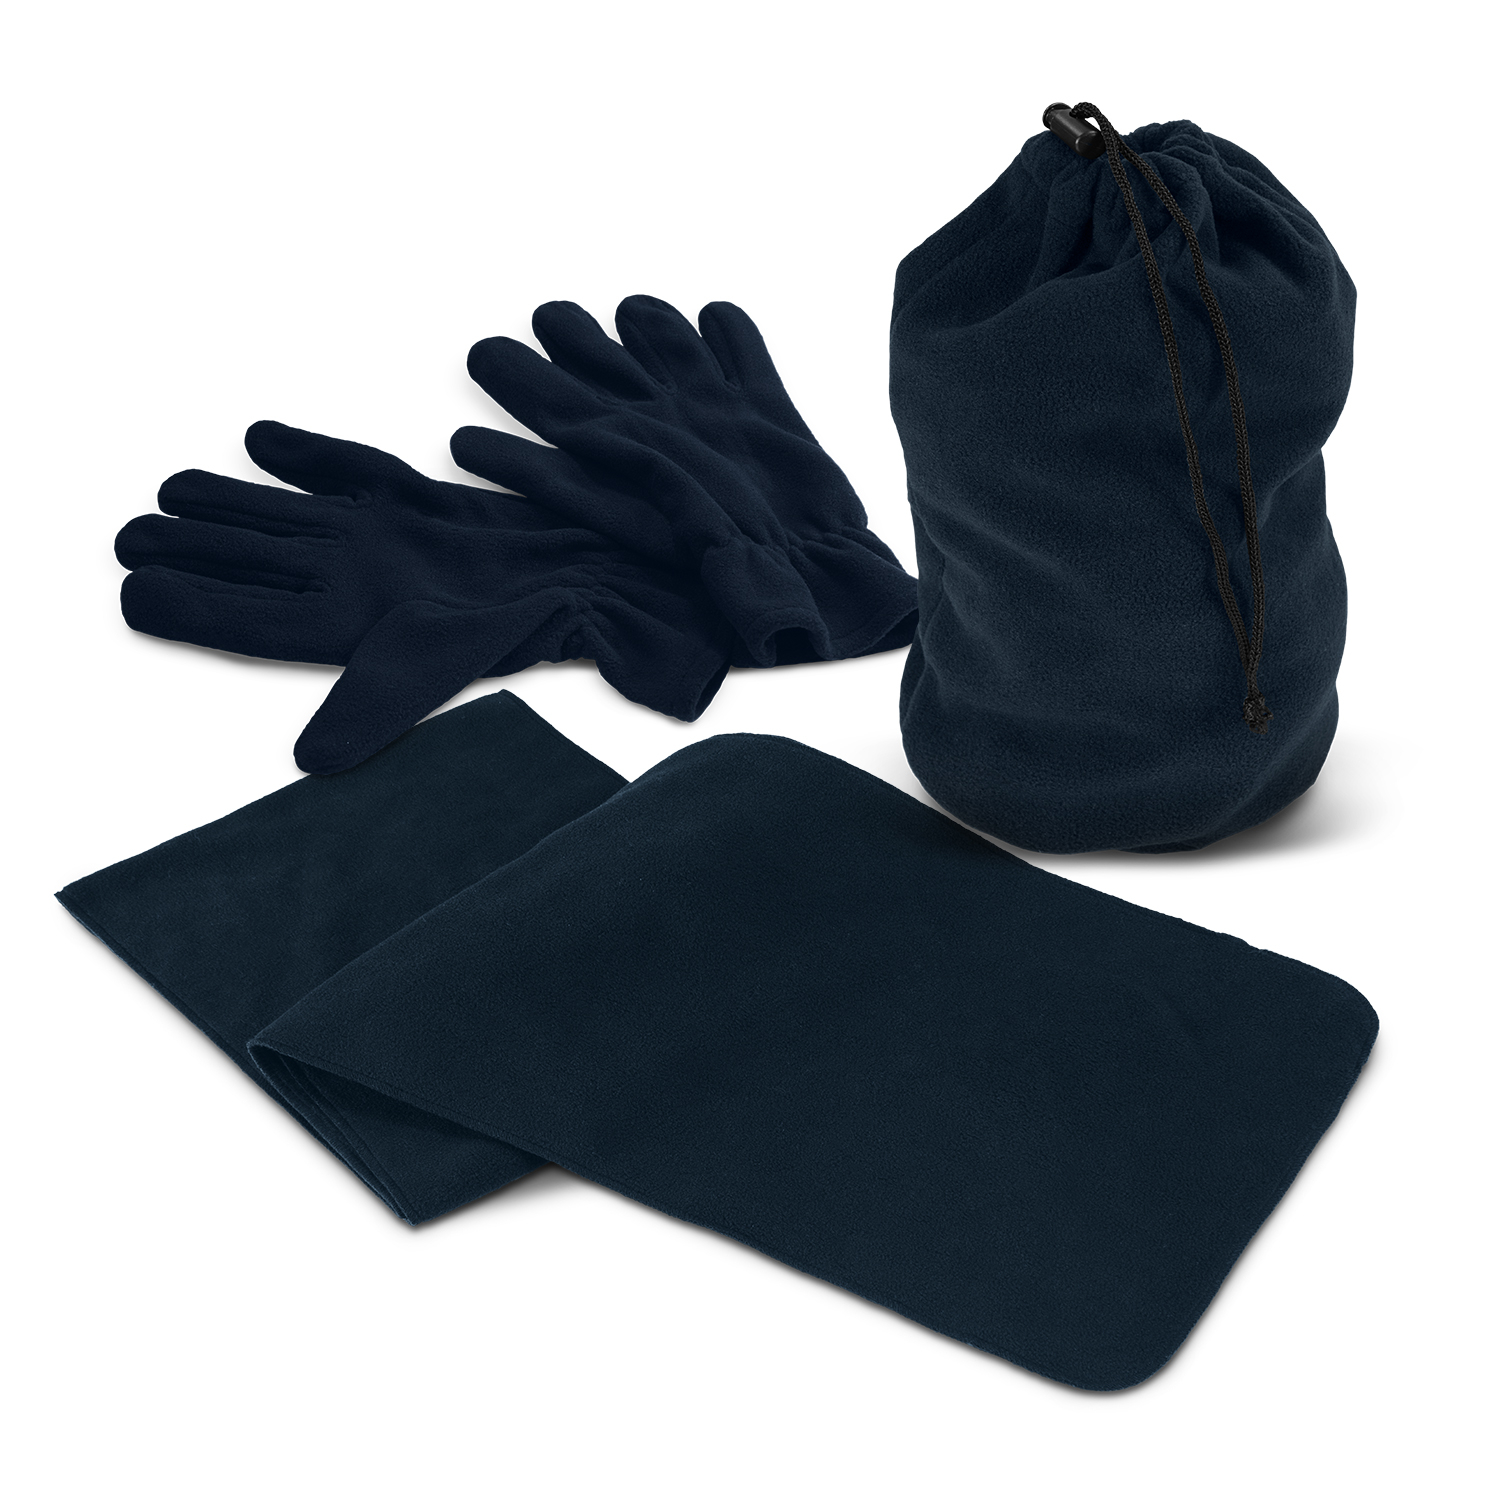 Winter Seattle Scarf and Gloves Set and